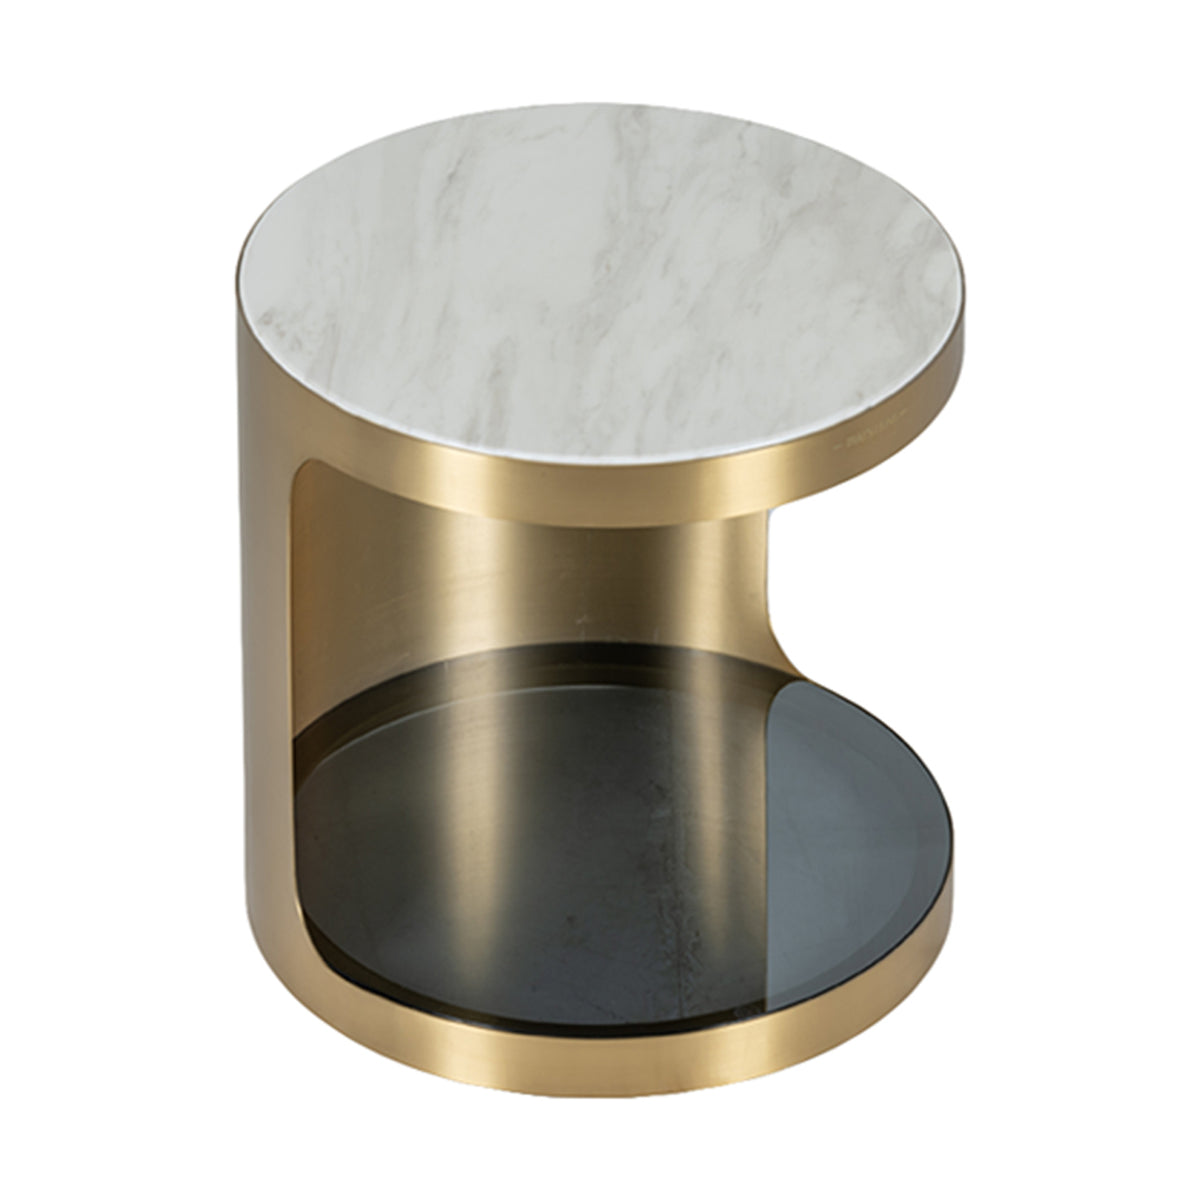 SHANNON BIANCO END TABLE